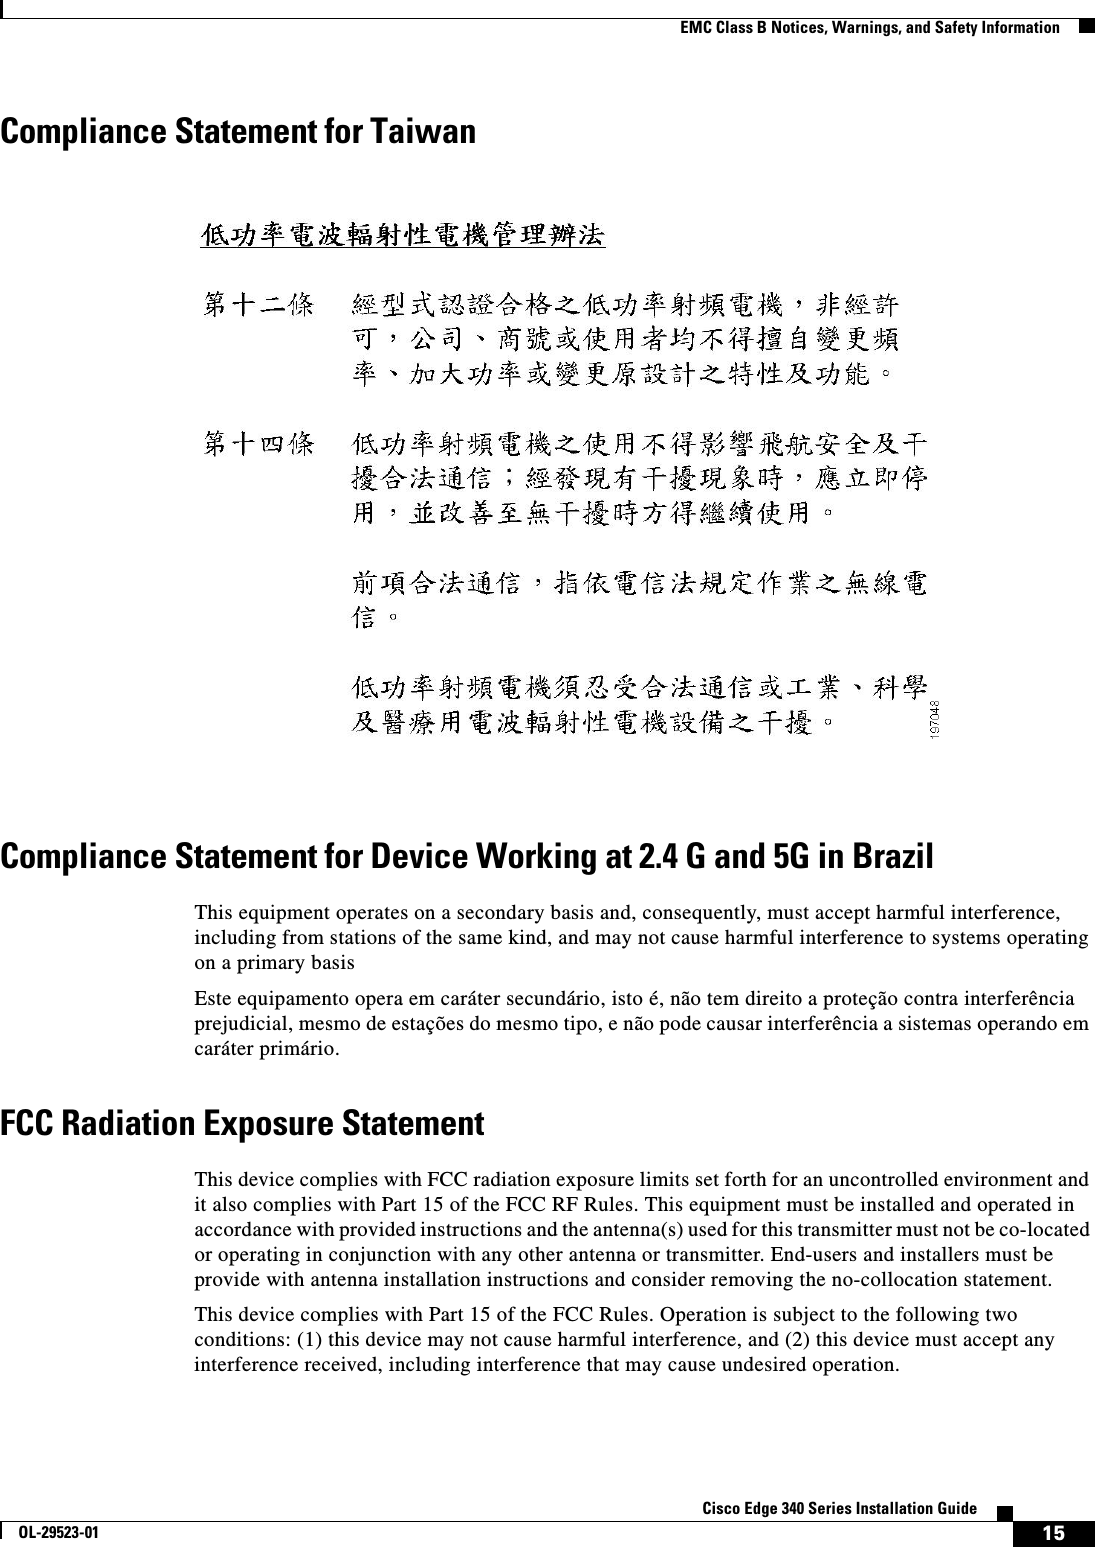  15Cisco Edge 340 Series Installation GuideOL-29523-01EMC Class B Notices, Warnings, and Safety InformationCompliance Statement for TaiwanCompliance Statement for Device Working at 2.4 G and 5G in BrazilThis equipment operates on a secondary basis and, consequently, must accept harmful interference, including from stations of the same kind, and may not cause harmful interference to systems operating on a primary basisEste equipamento opera em caráter secundário, isto é, não tem direito a proteção contra interferência prejudicial, mesmo de estações do mesmo tipo, e não pode causar interferência a sistemas operando em caráter primário.FCC Radiation Exposure StatementThis device complies with FCC radiation exposure limits set forth for an uncontrolled environment and it also complies with Part 15 of the FCC RF Rules. This equipment must be installed and operated in accordance with provided instructions and the antenna(s) used for this transmitter must not be co-located or operating in conjunction with any other antenna or transmitter. End-users and installers must be provide with antenna installation instructions and consider removing the no-collocation statement.This device complies with Part 15 of the FCC Rules. Operation is subject to the following two conditions: (1) this device may not cause harmful interference, and (2) this device must accept any interference received, including interference that may cause undesired operation.